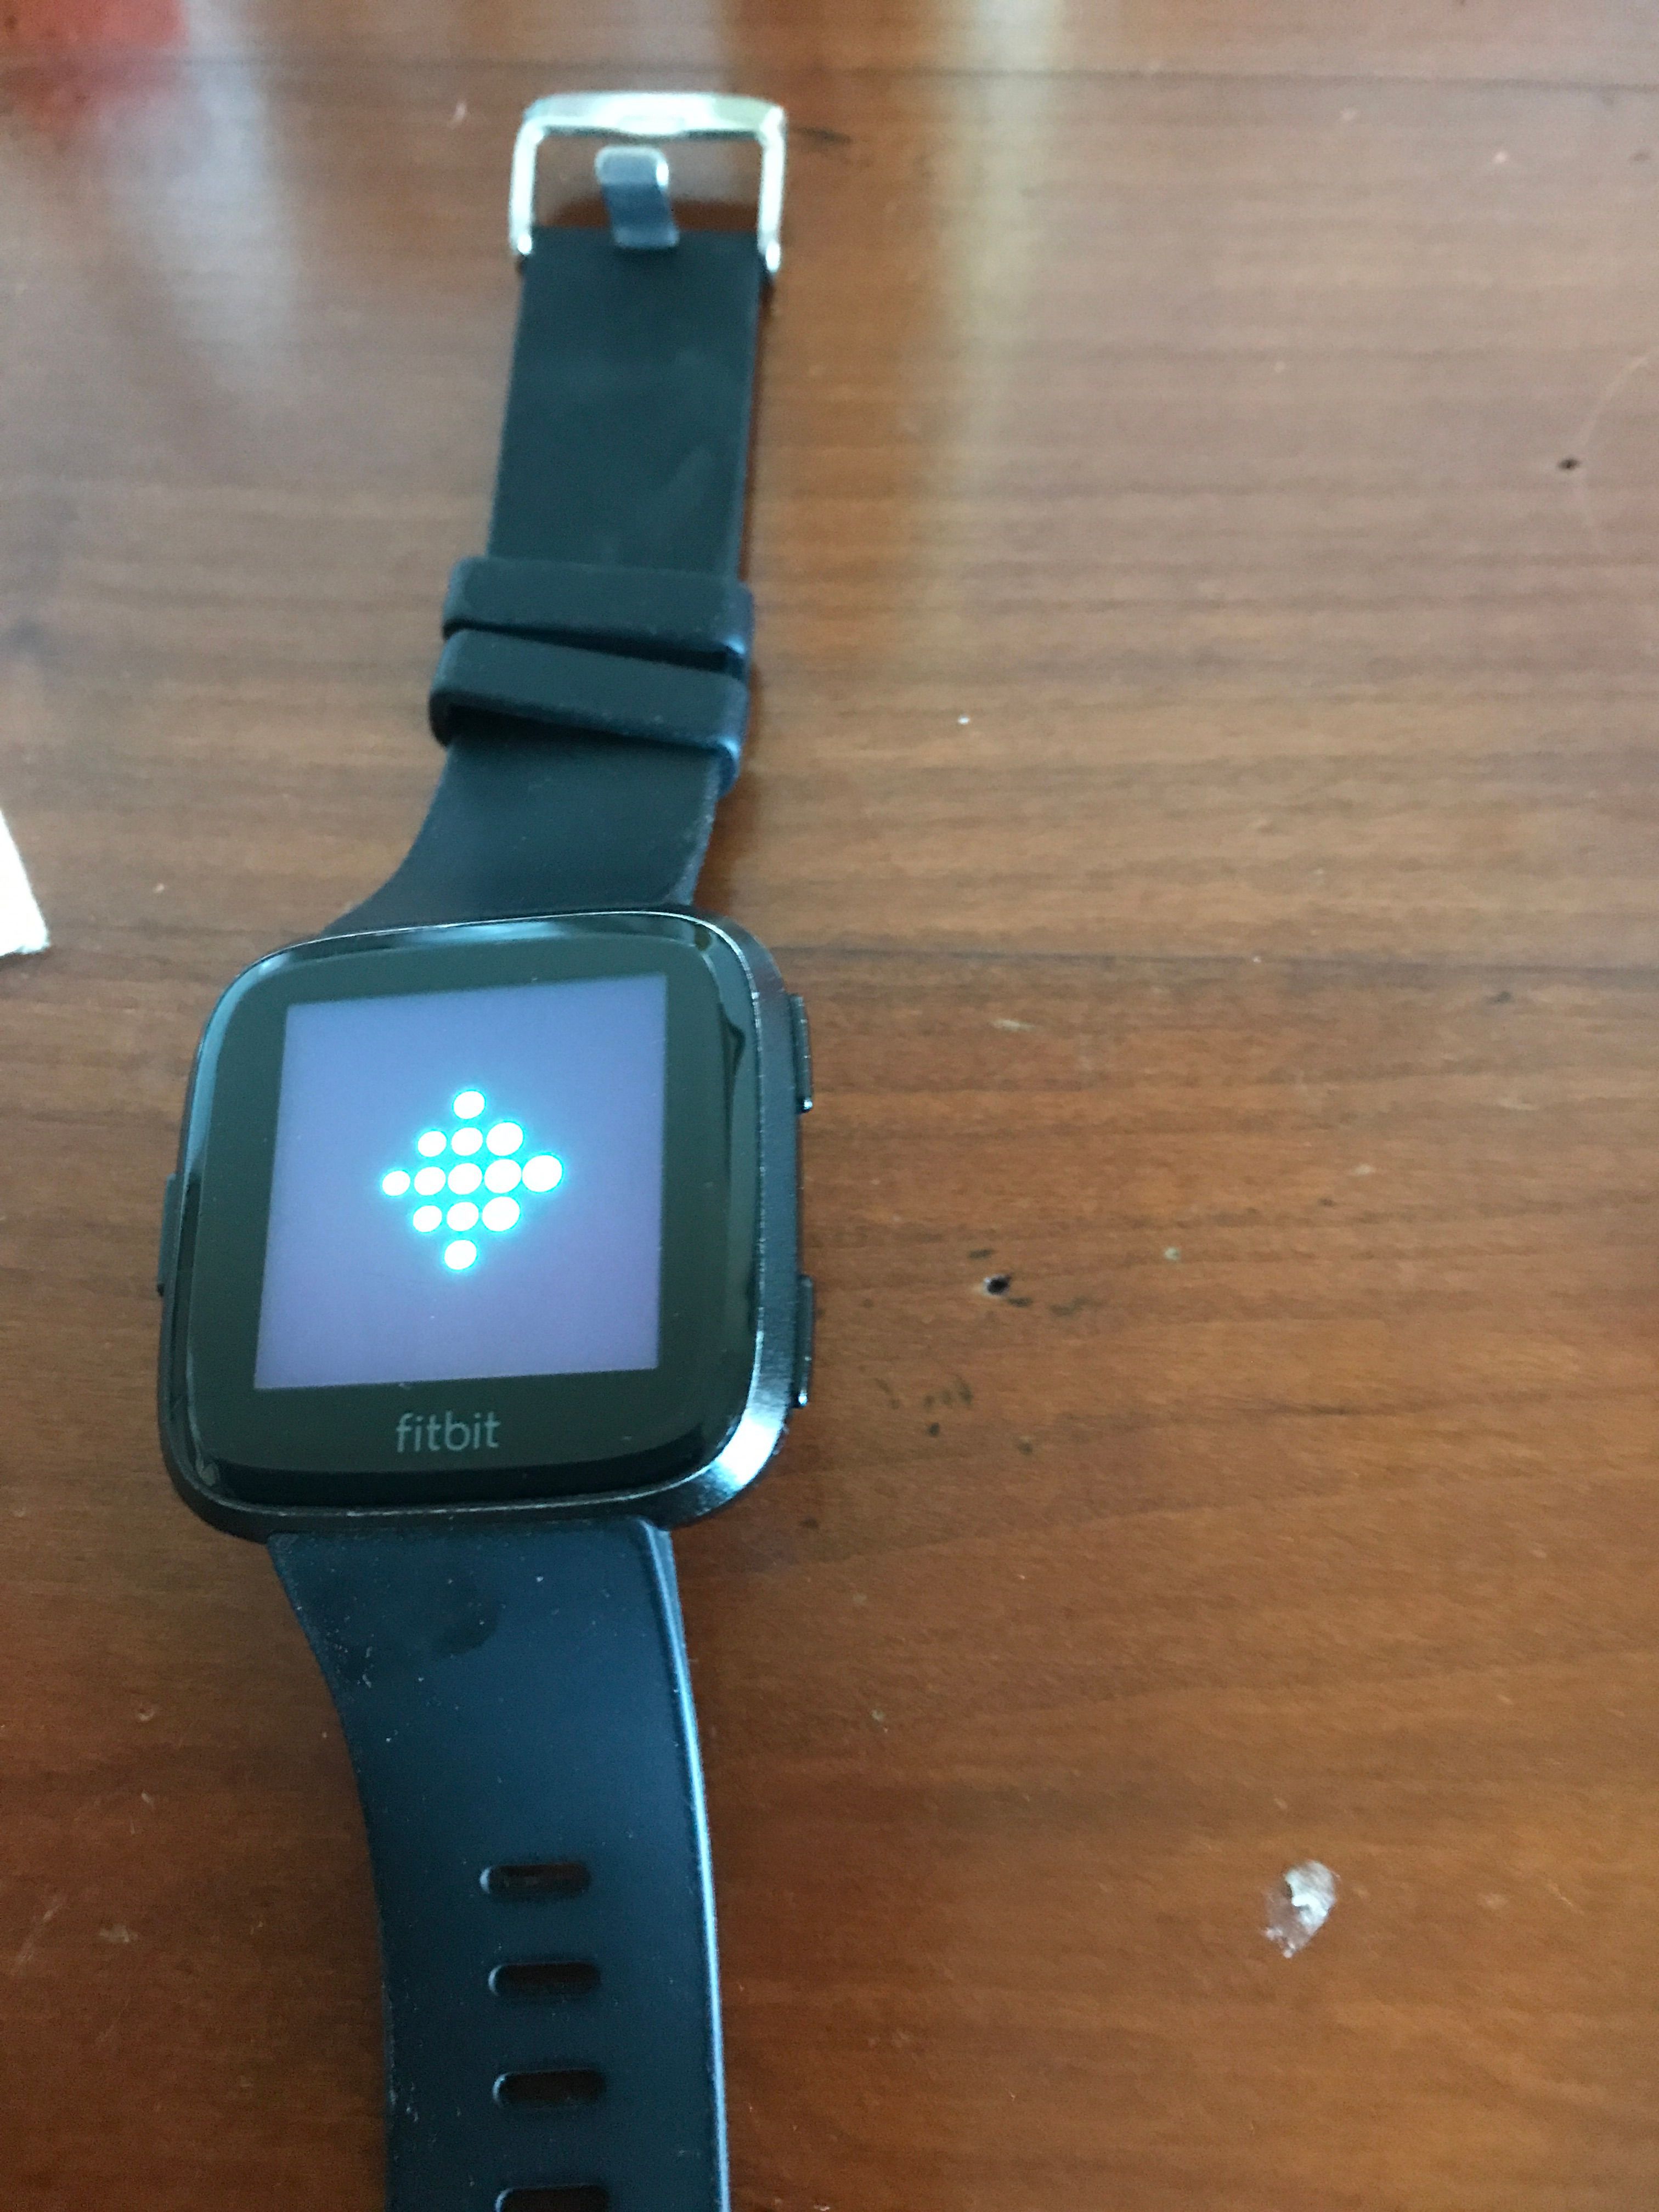 Shows only dots - Fitbit Community